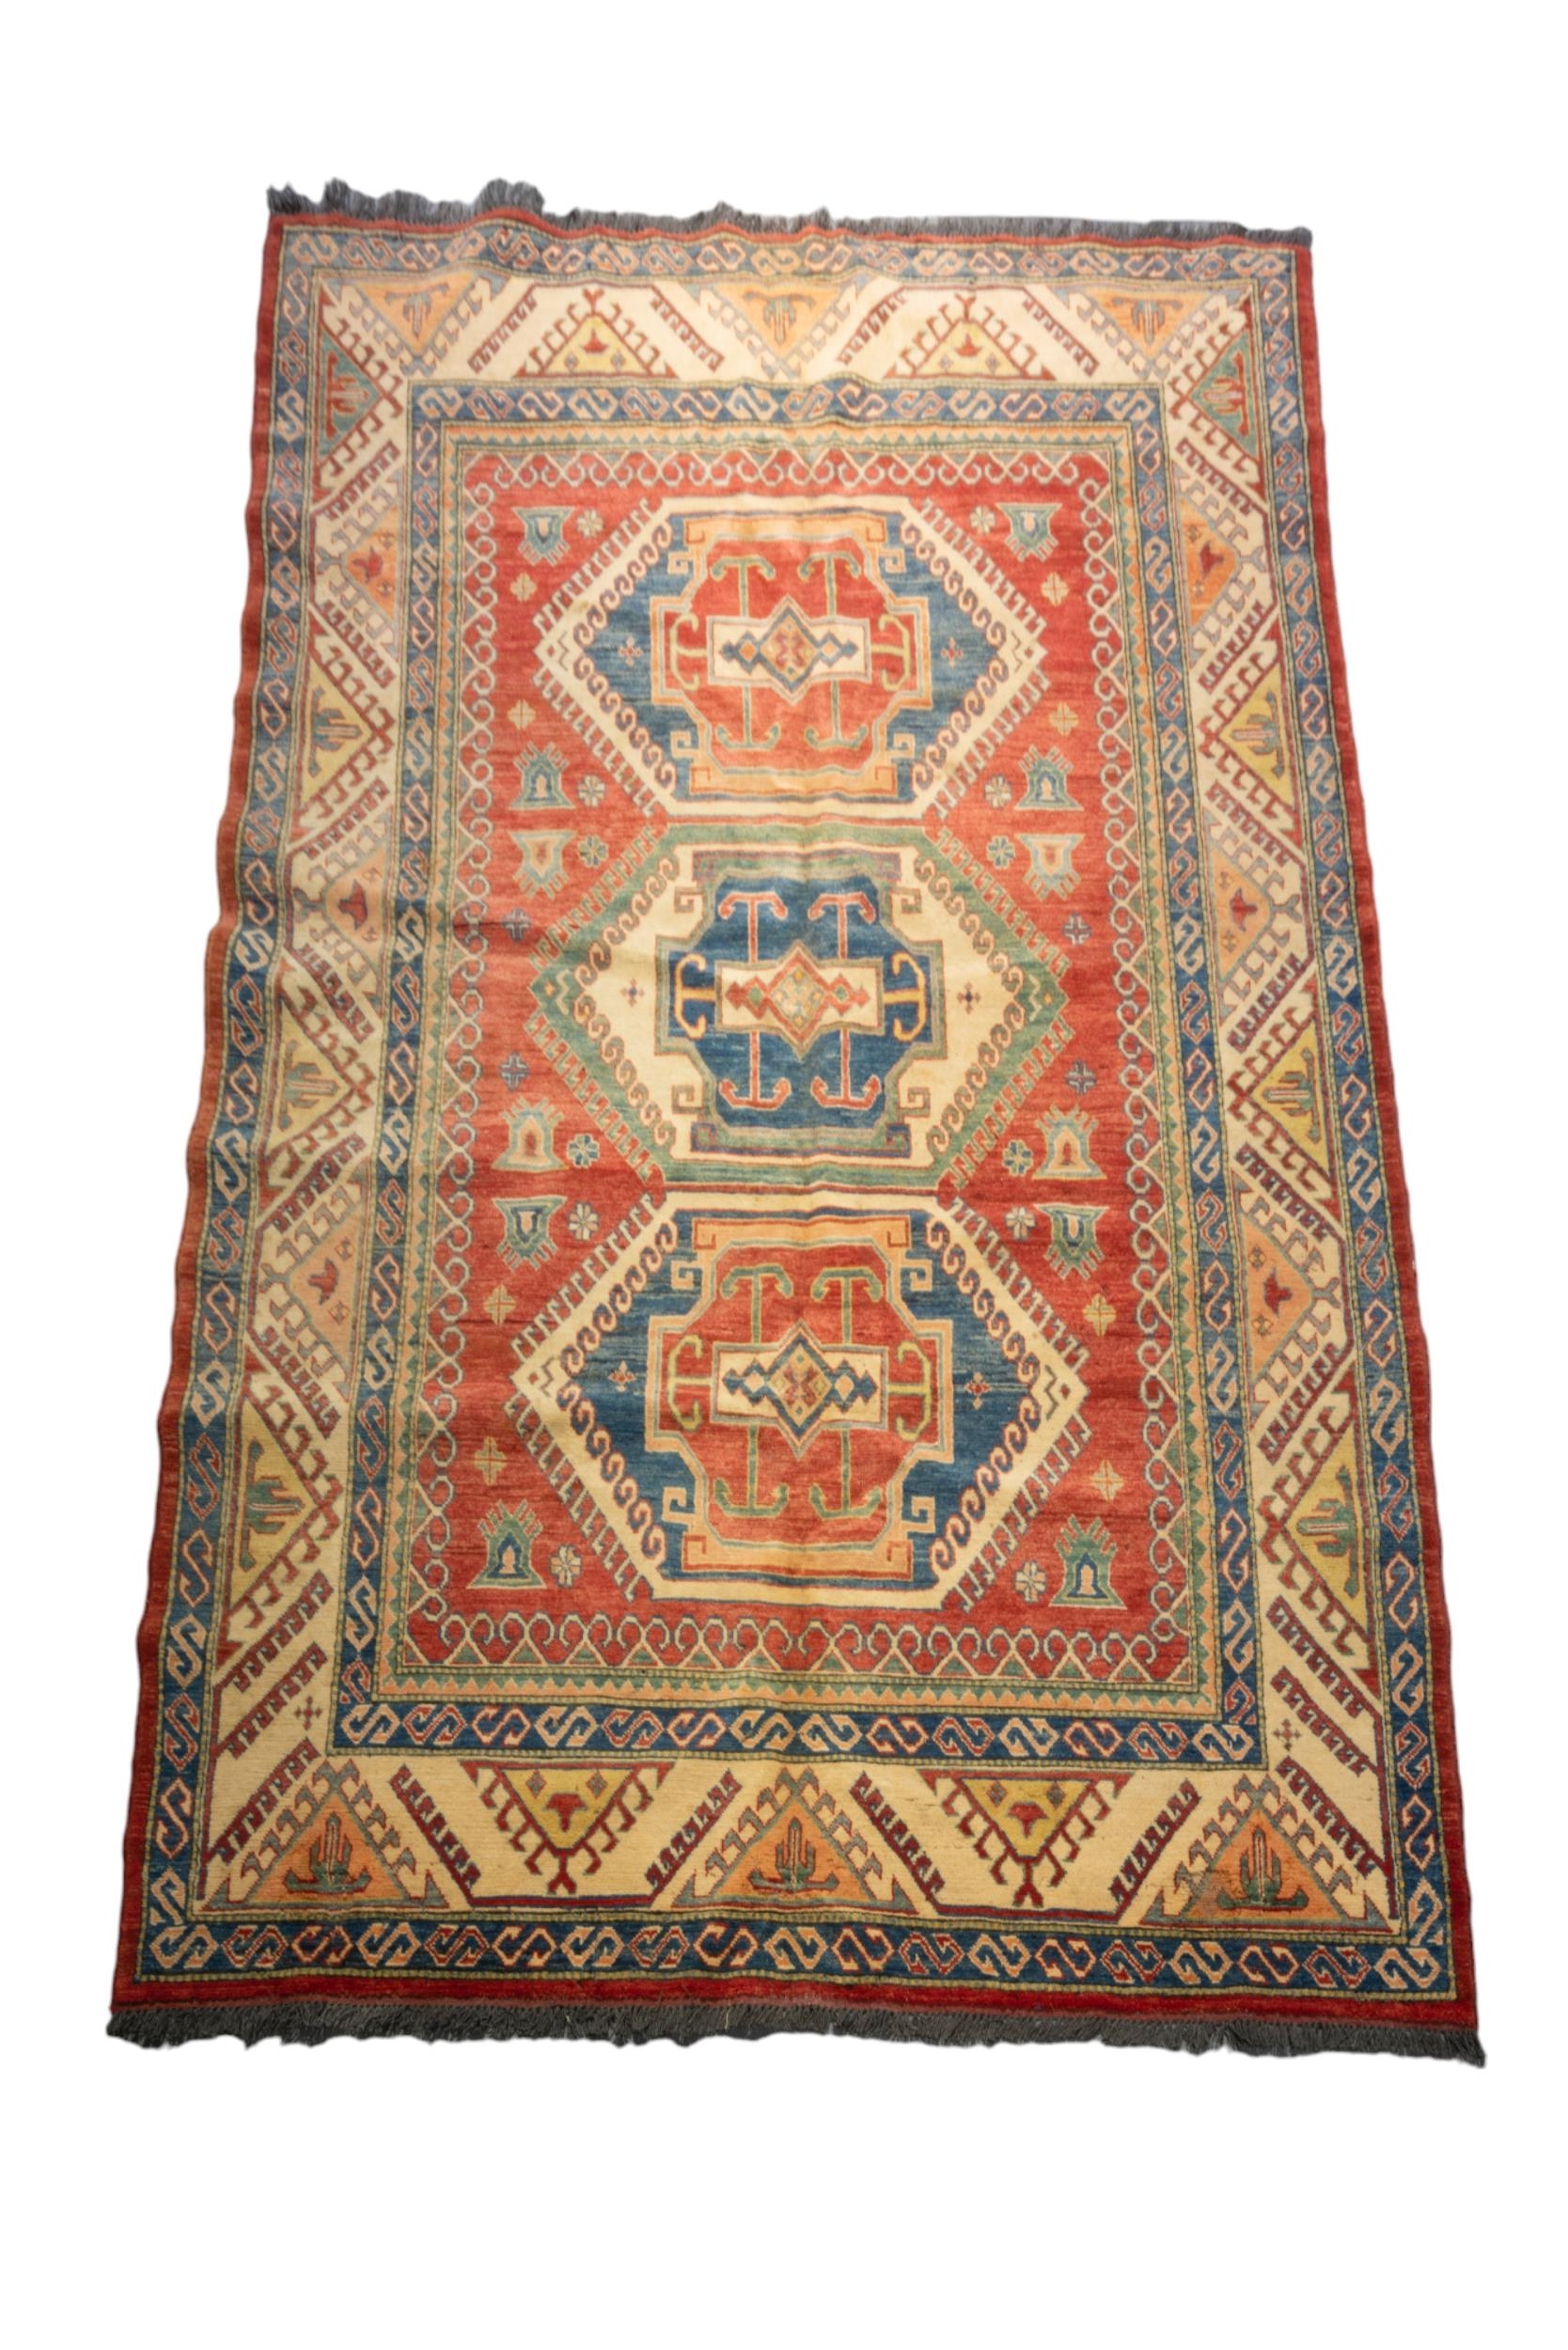 A HAND KNOTTED PERSIAN RUG, MID-LATE 20TH CENTURY, probably Kazhak, small area of damage 332 x 200 - Image 5 of 6